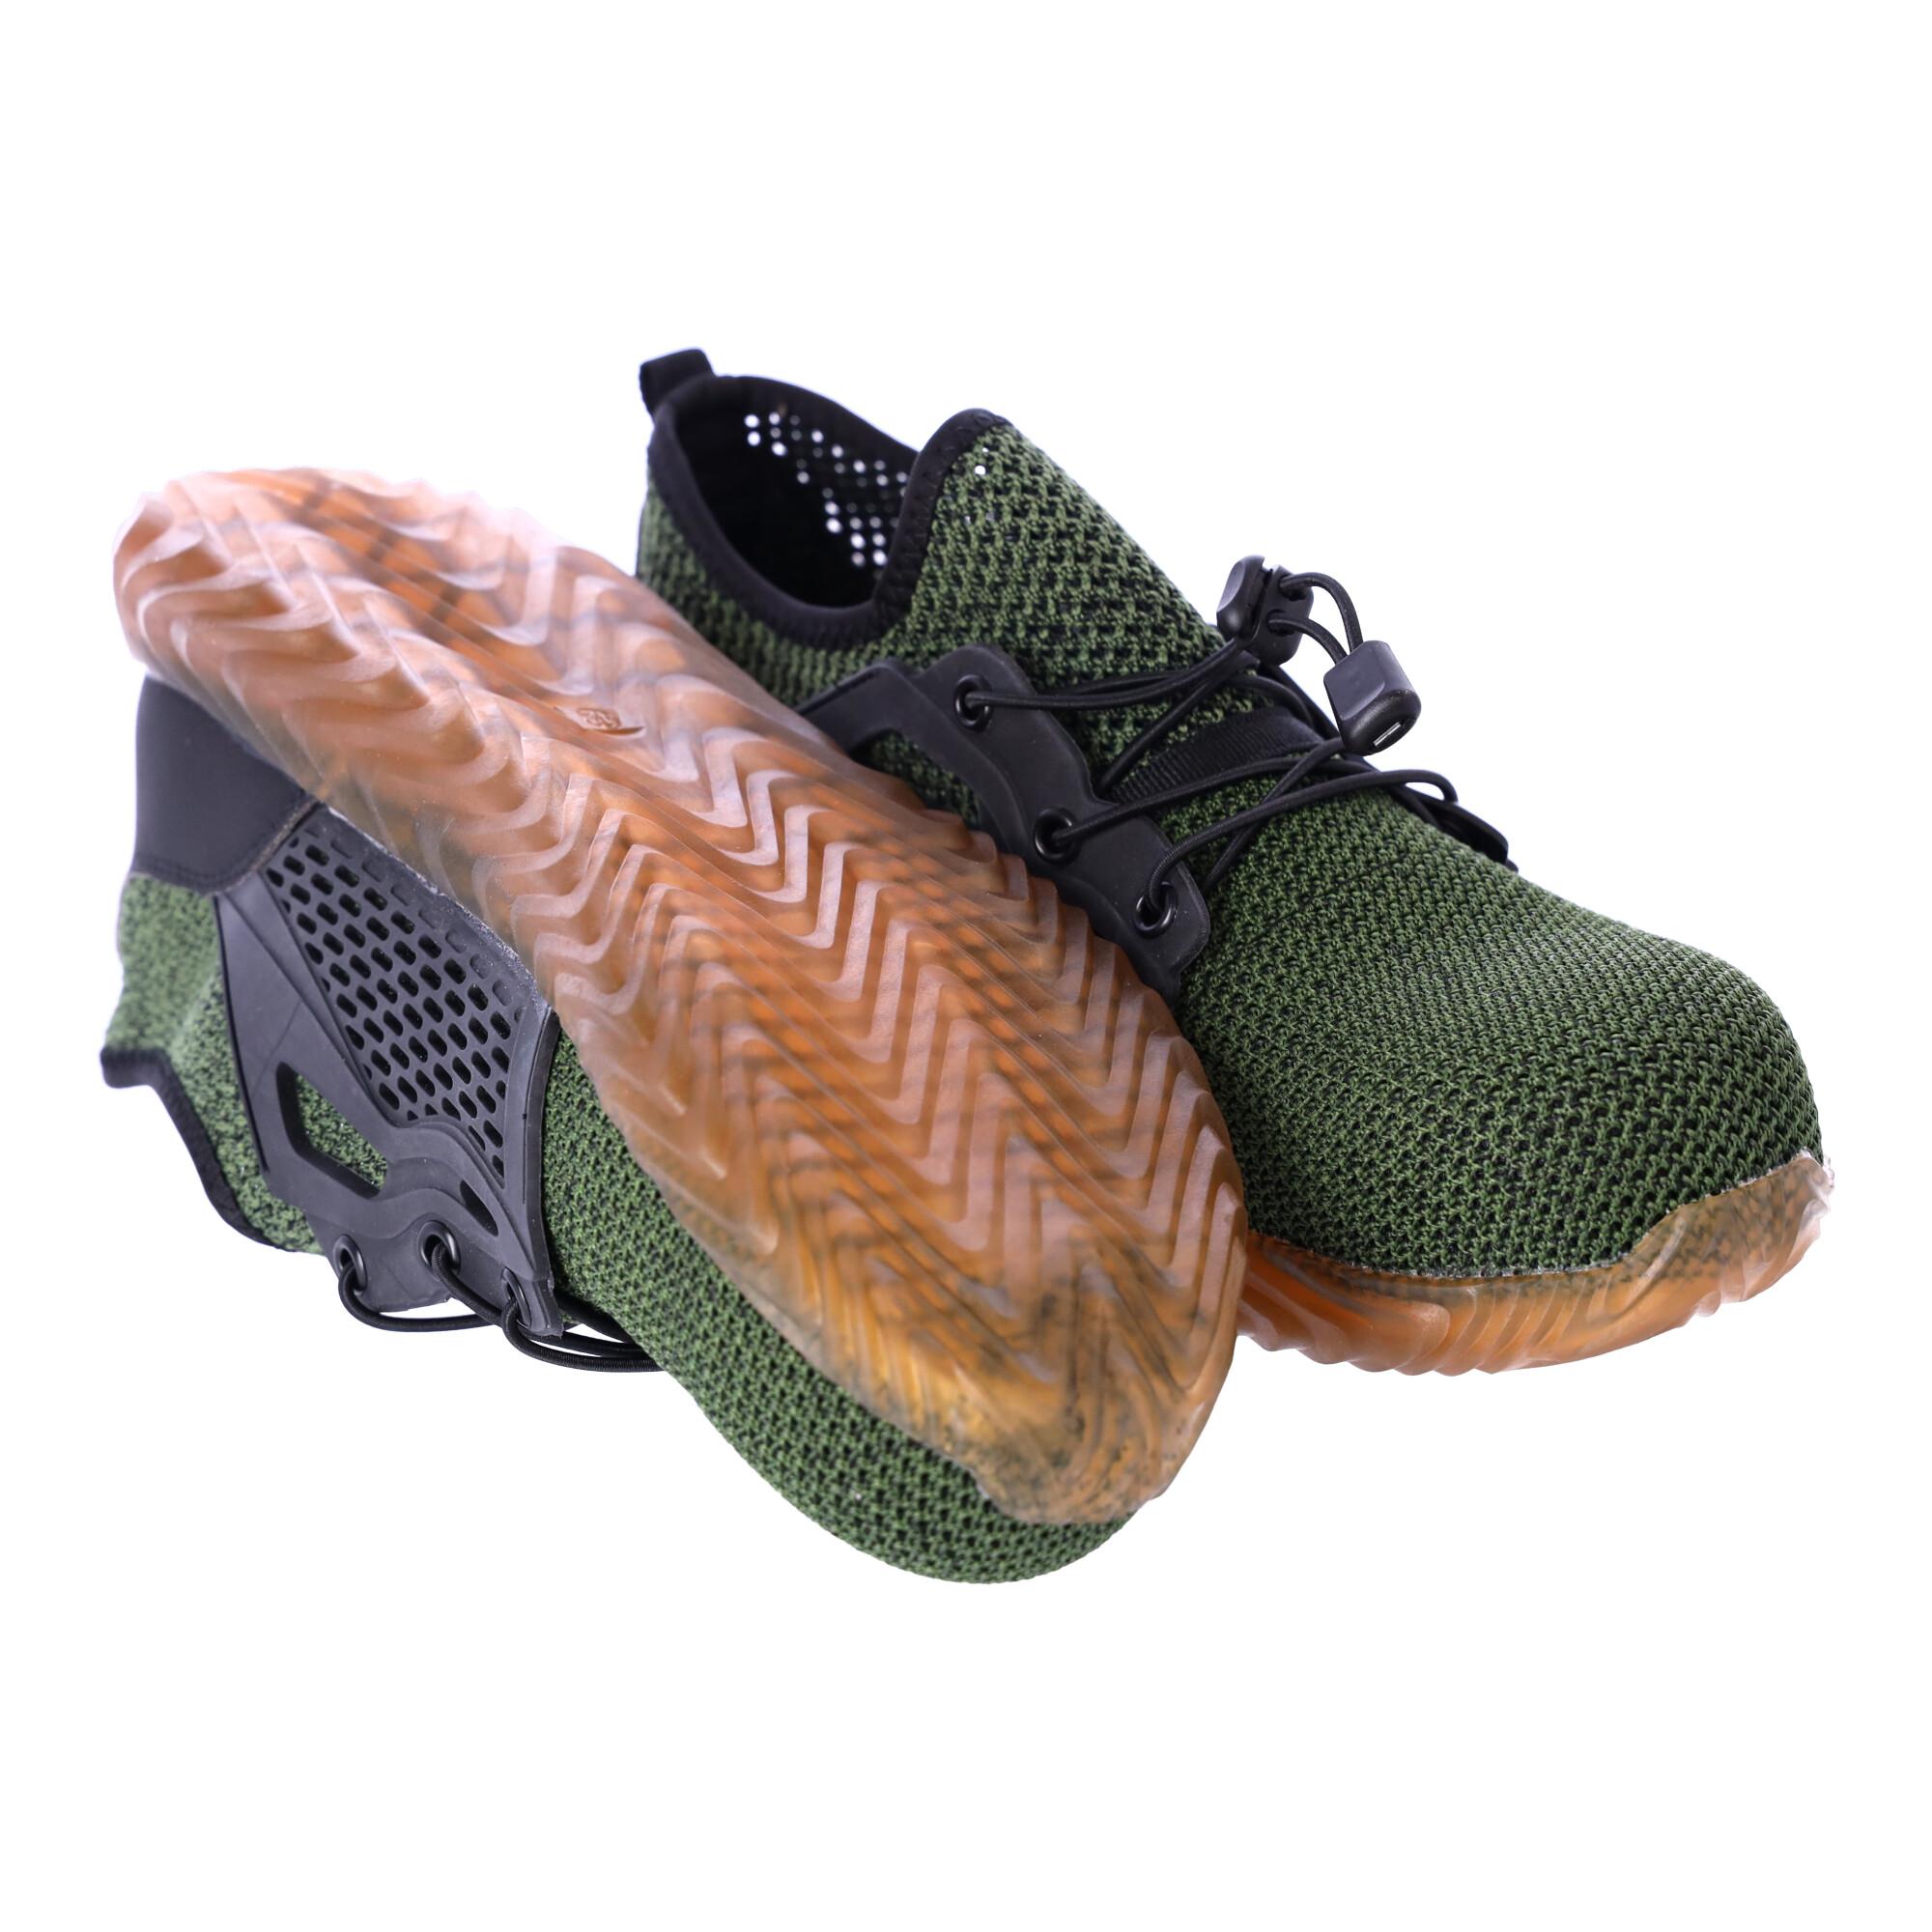 Work safety shoes Soft "40" - green